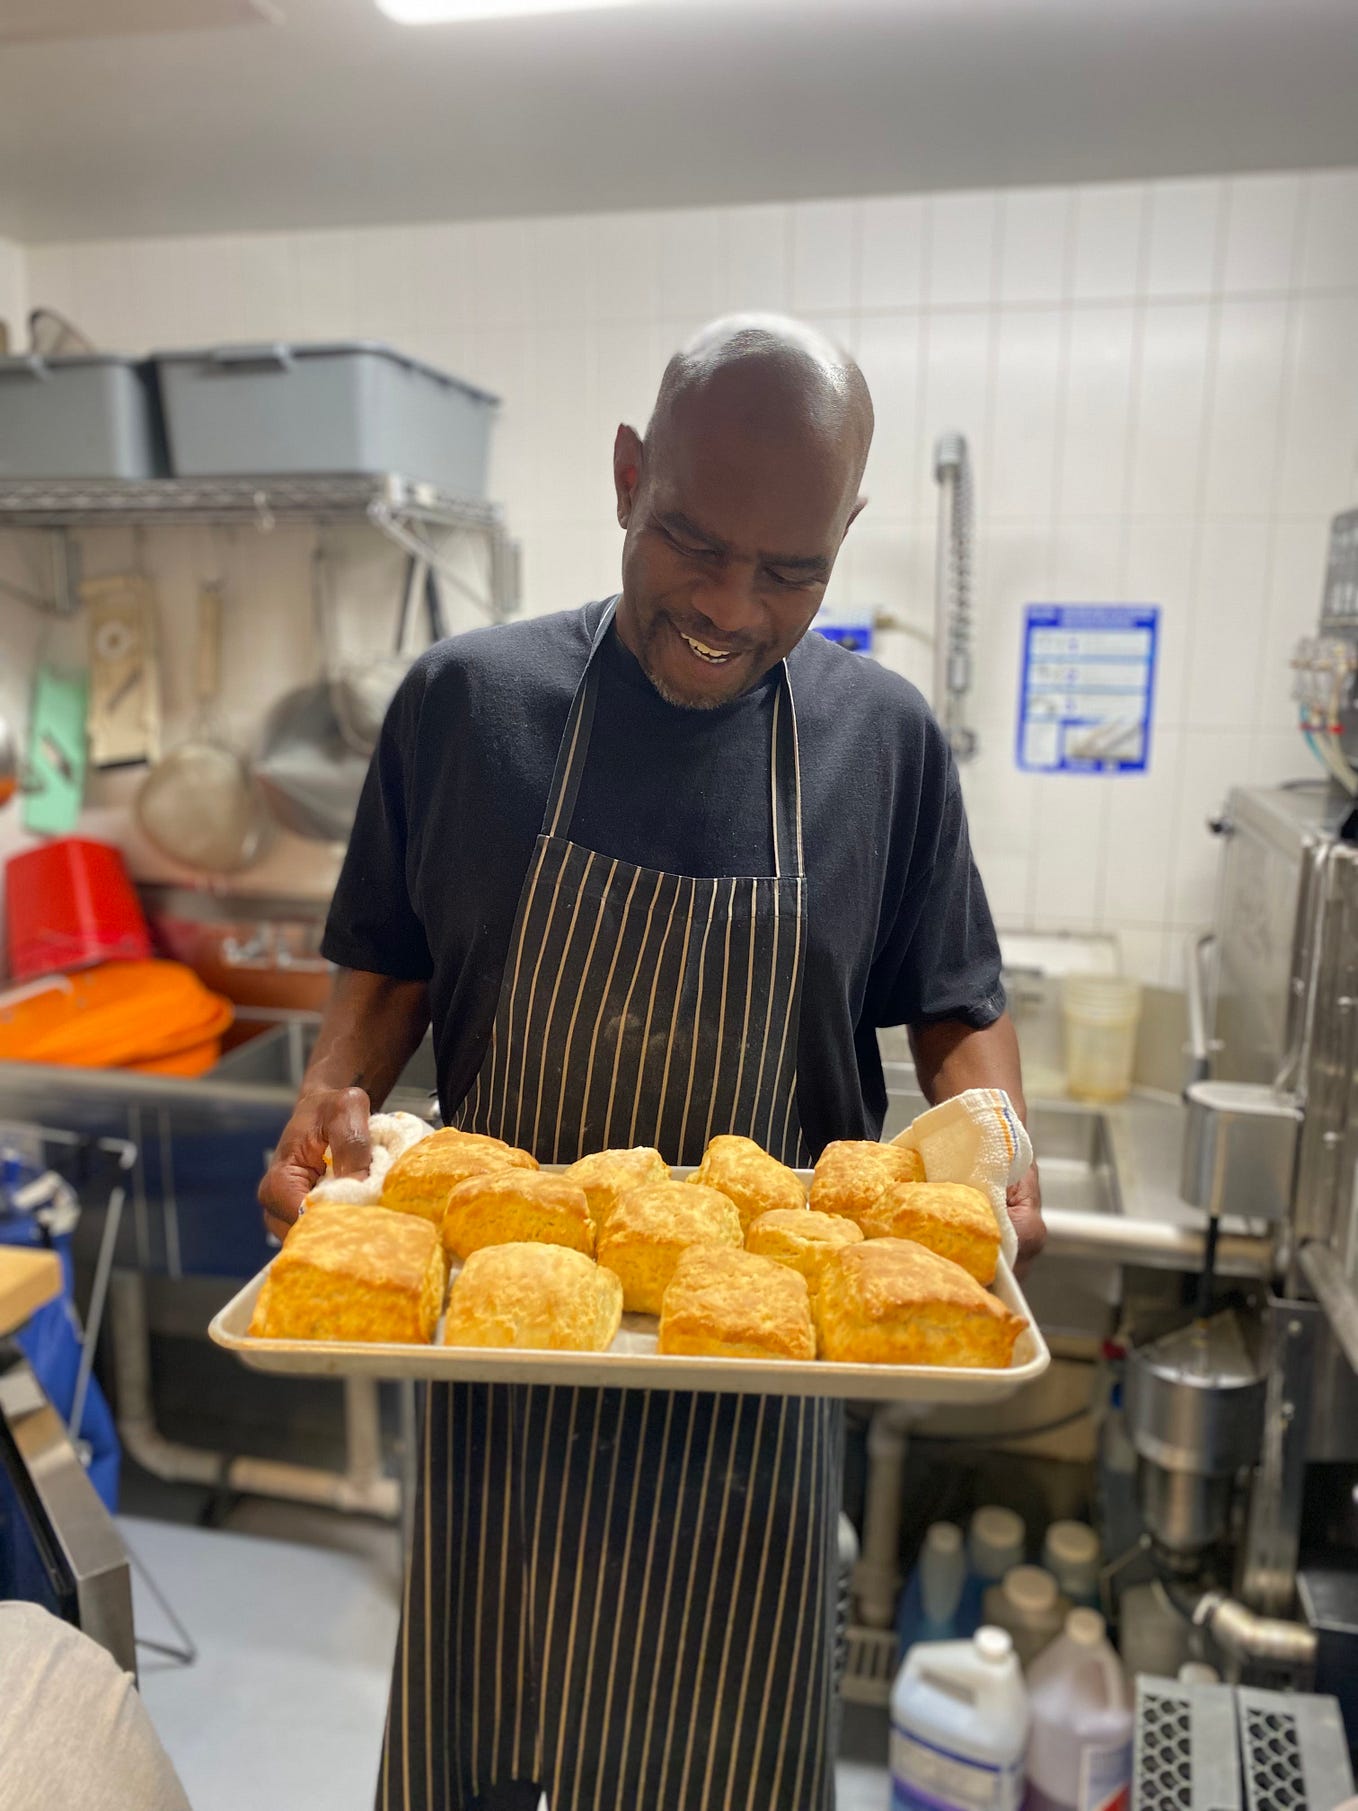 David, a black man, stands smiling down at a baking sheet filled with biscuits. He is wearing a black t-shirt and a black and white striped apron in an industrial kitchen.